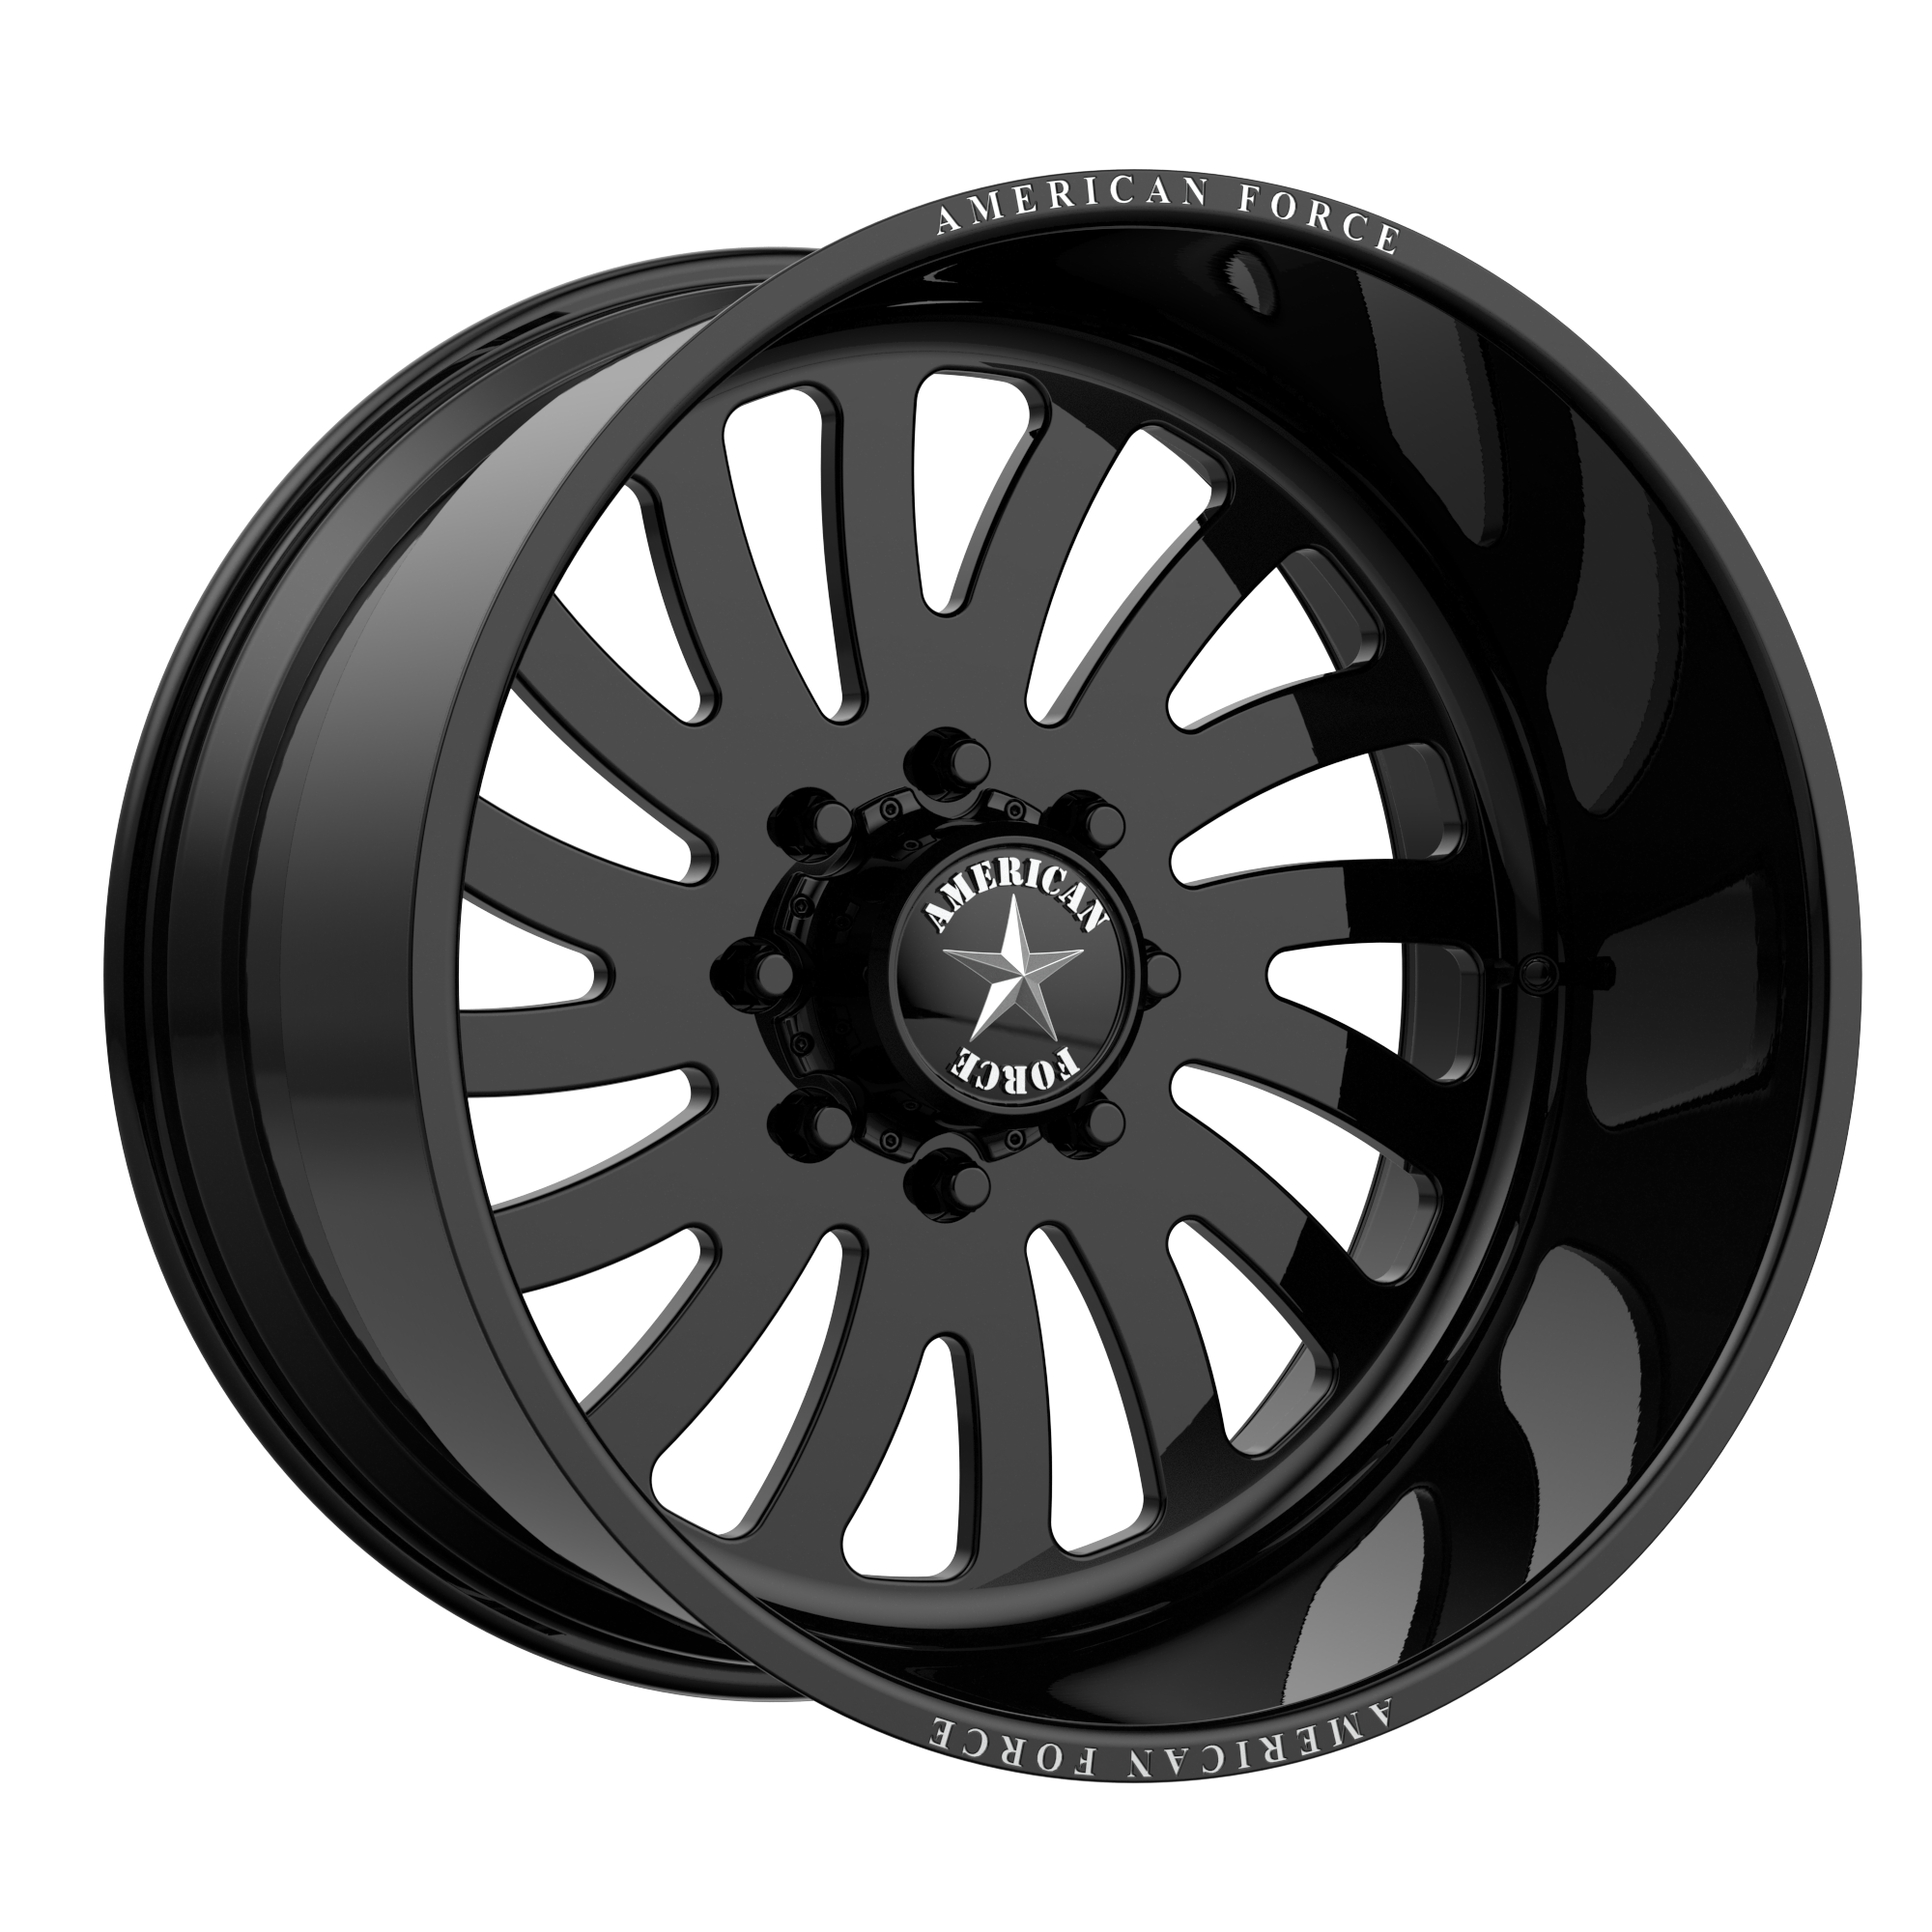 OCTANE SS 20x9 6x139.70 GLOSS BLACK MACHINED (0 mm) - Tires and Engine Performance